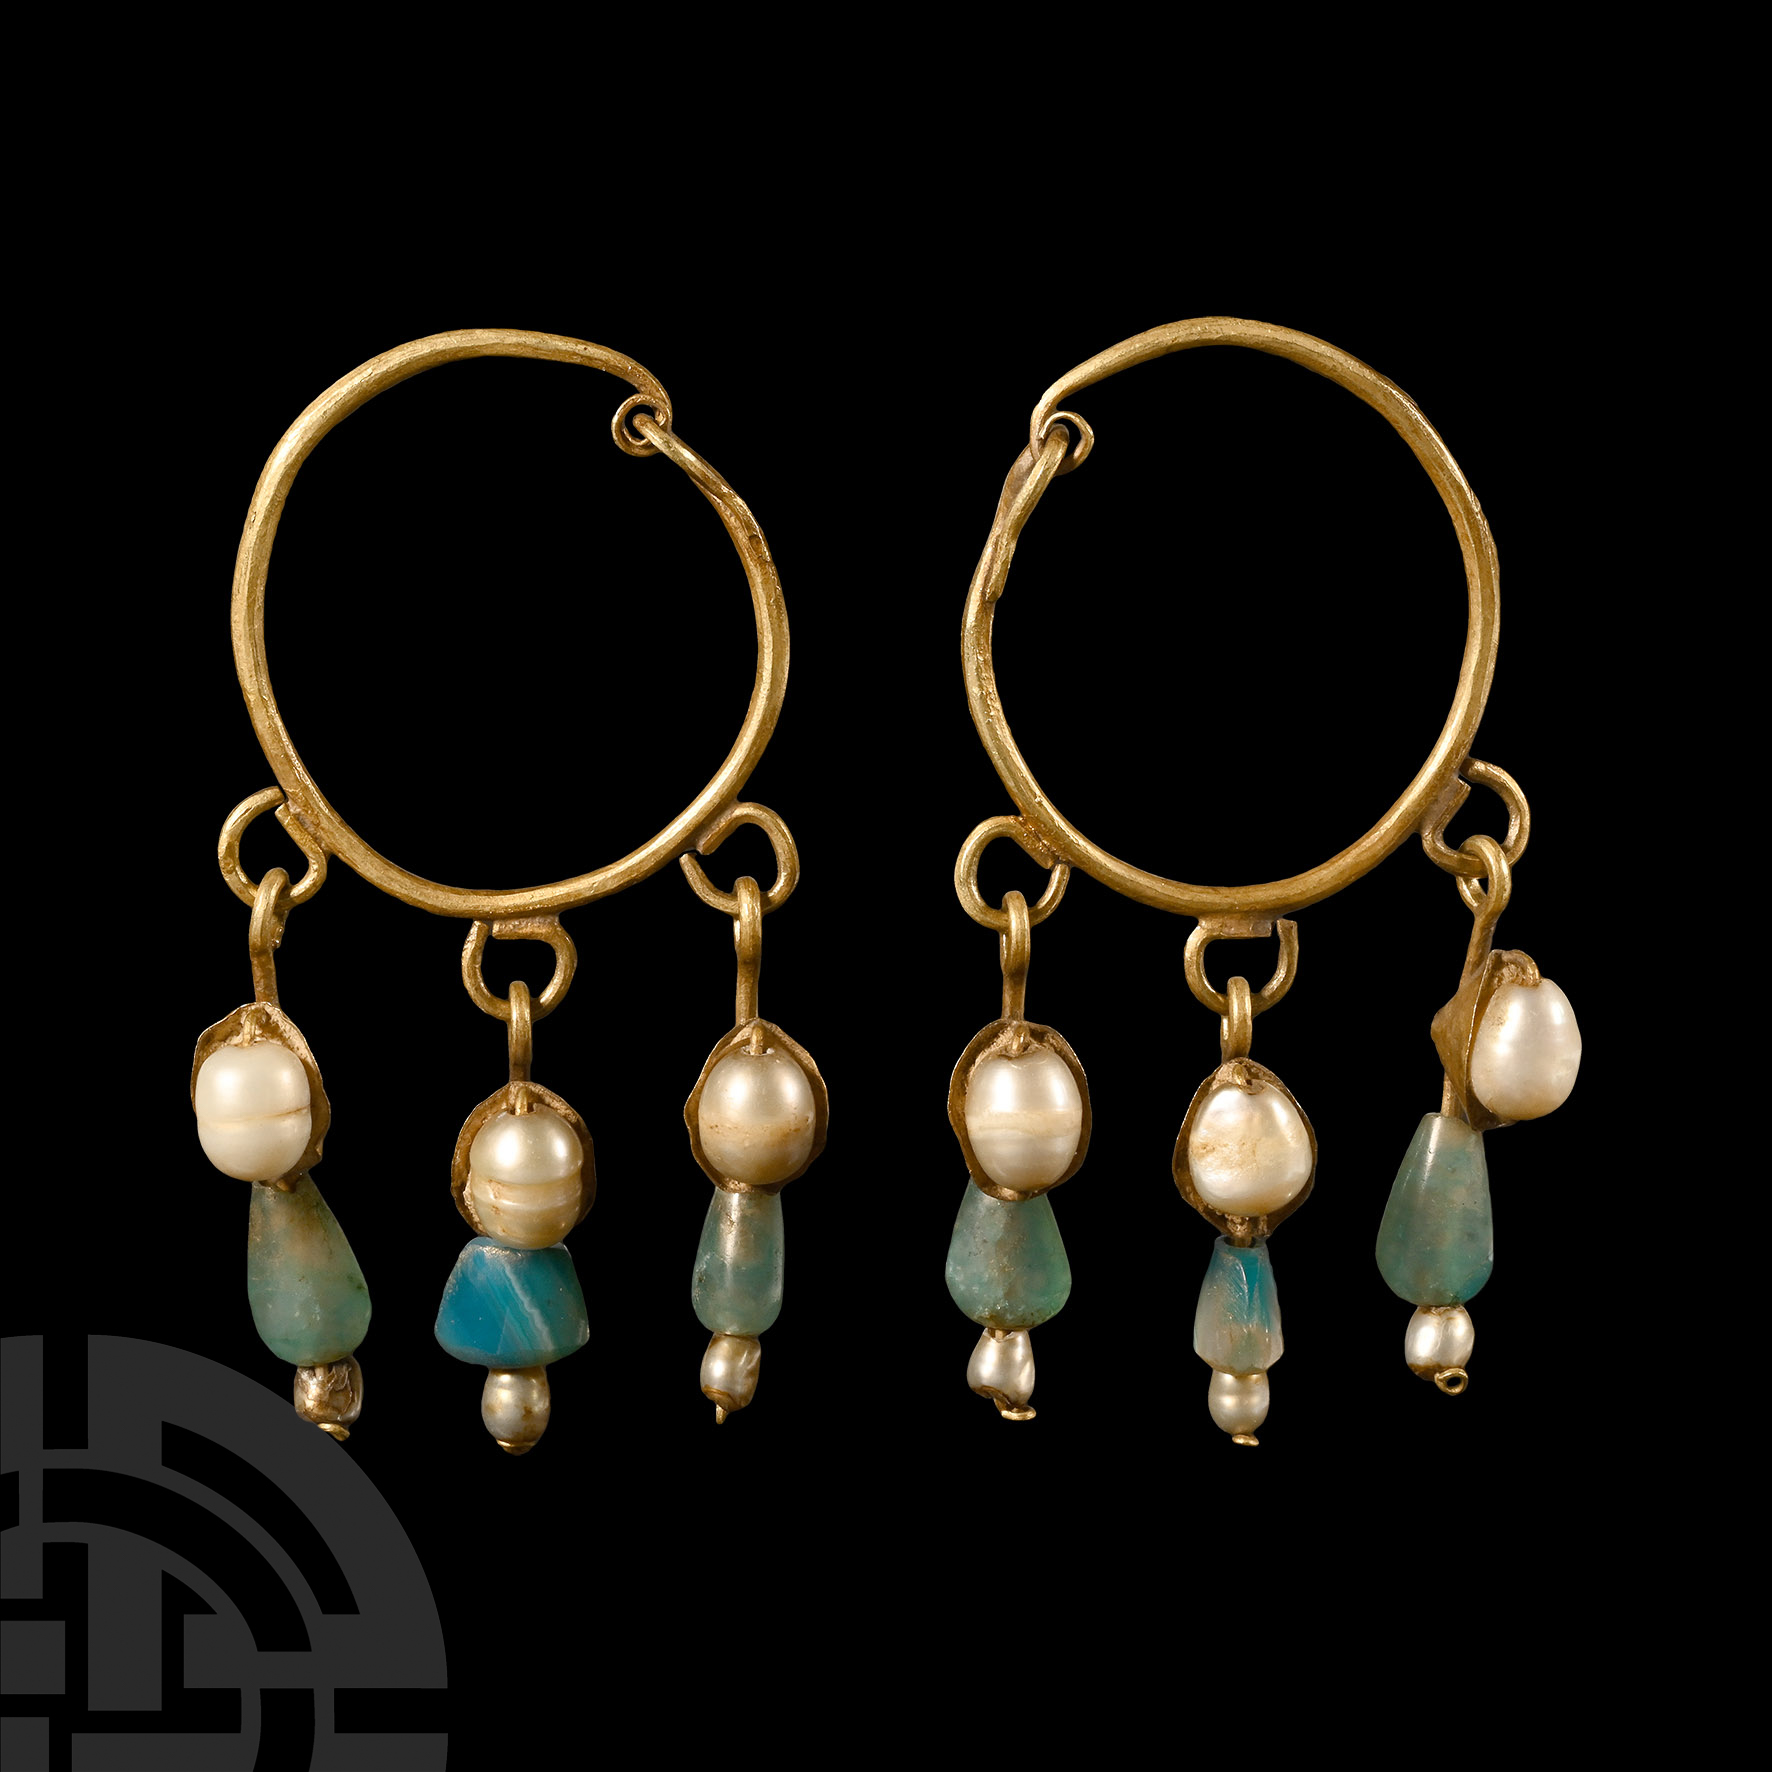 Hellenistic Gold Earrings with Beads and Pearls